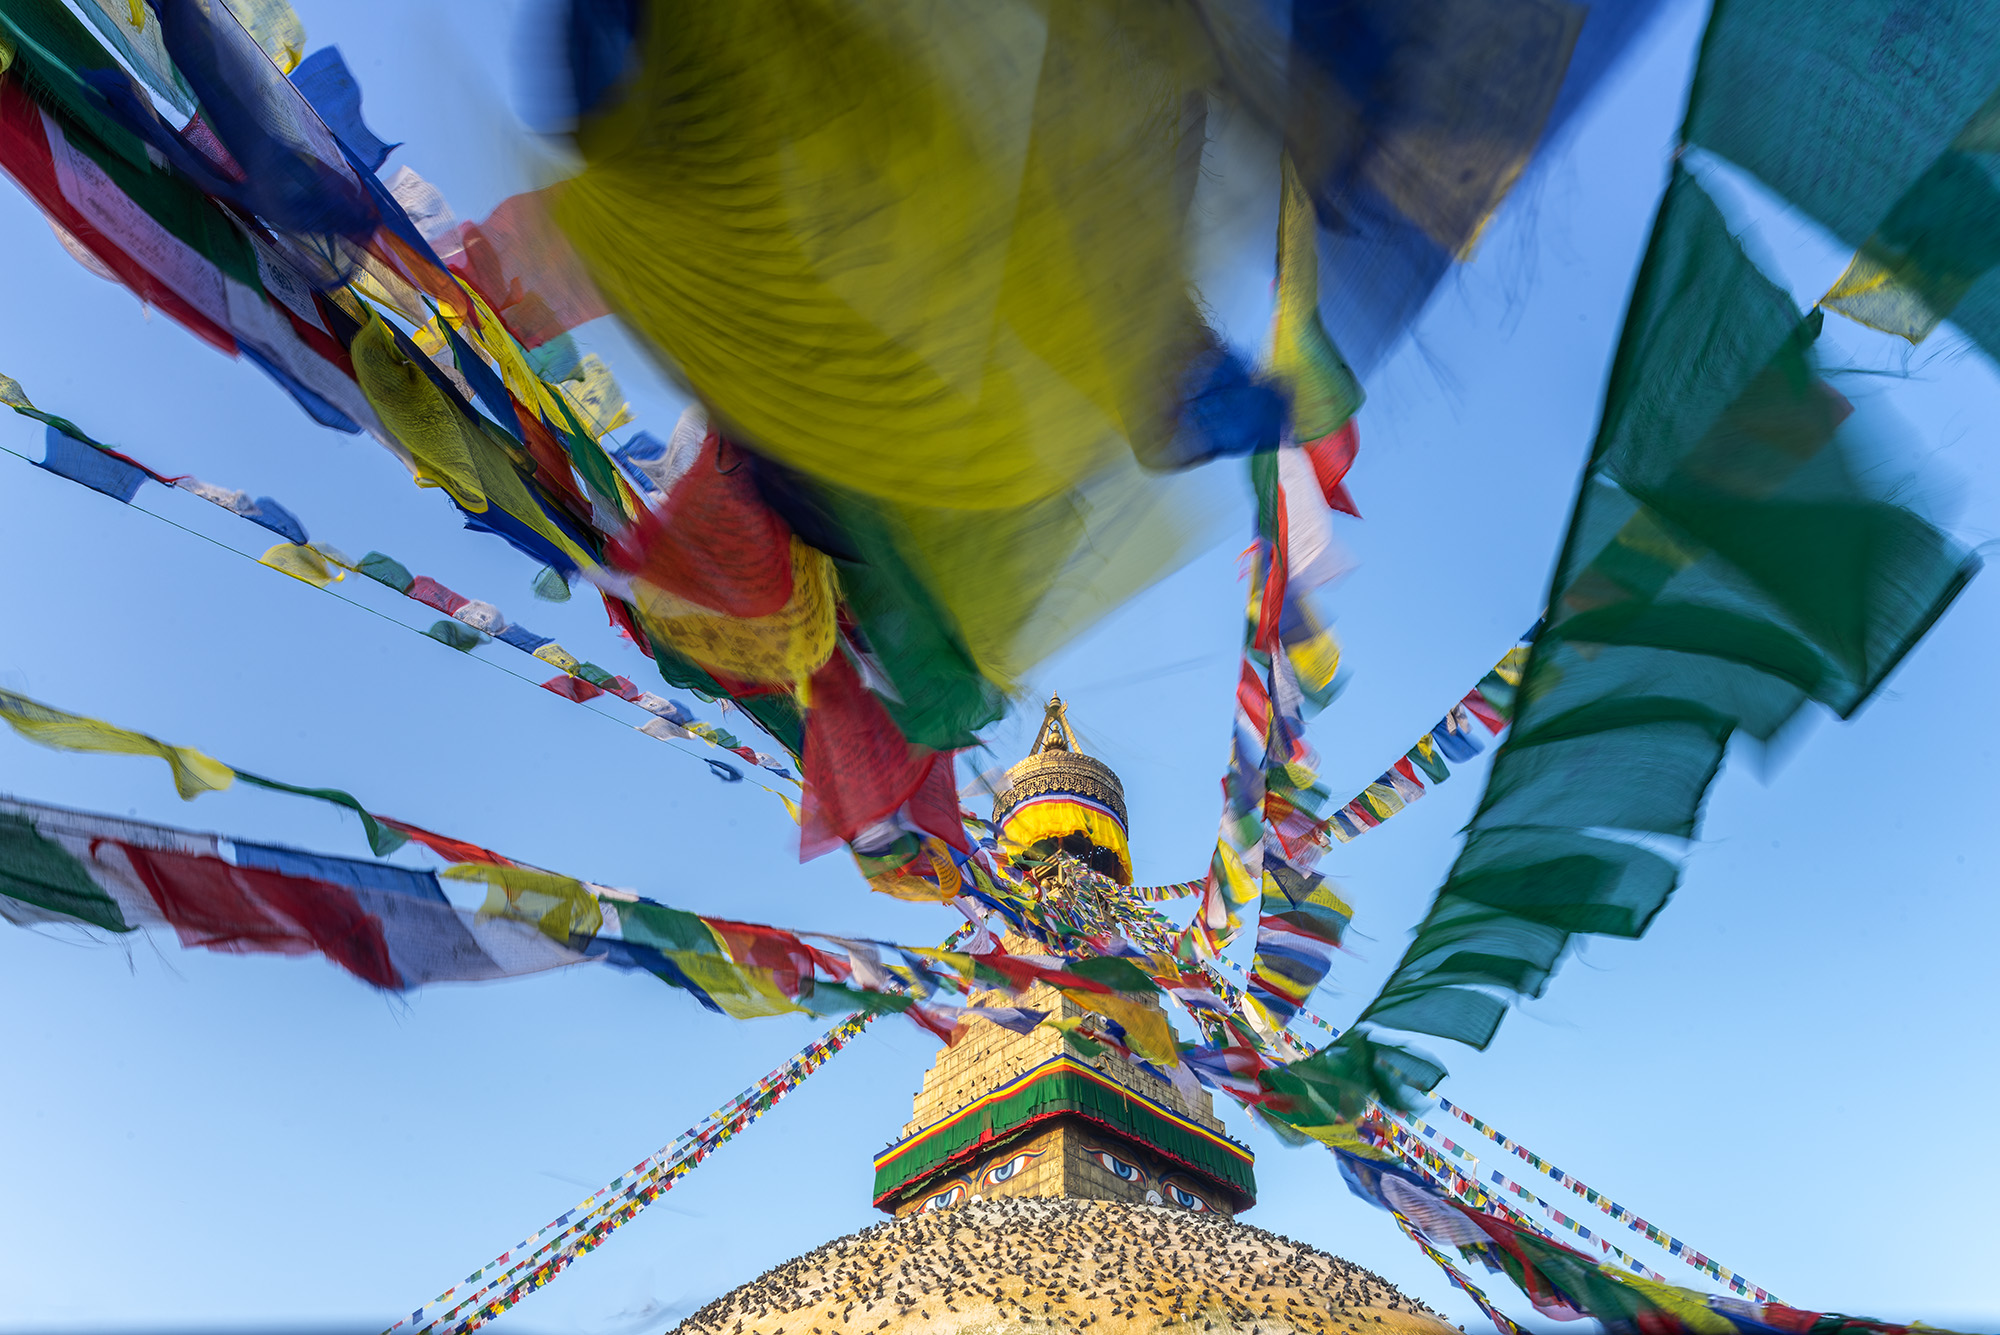 "Ascending Blessings" offers a unique perspective of Boudhanath Stupa in Kathmandu, Nepal. As dawn's first light bathes the stupa...